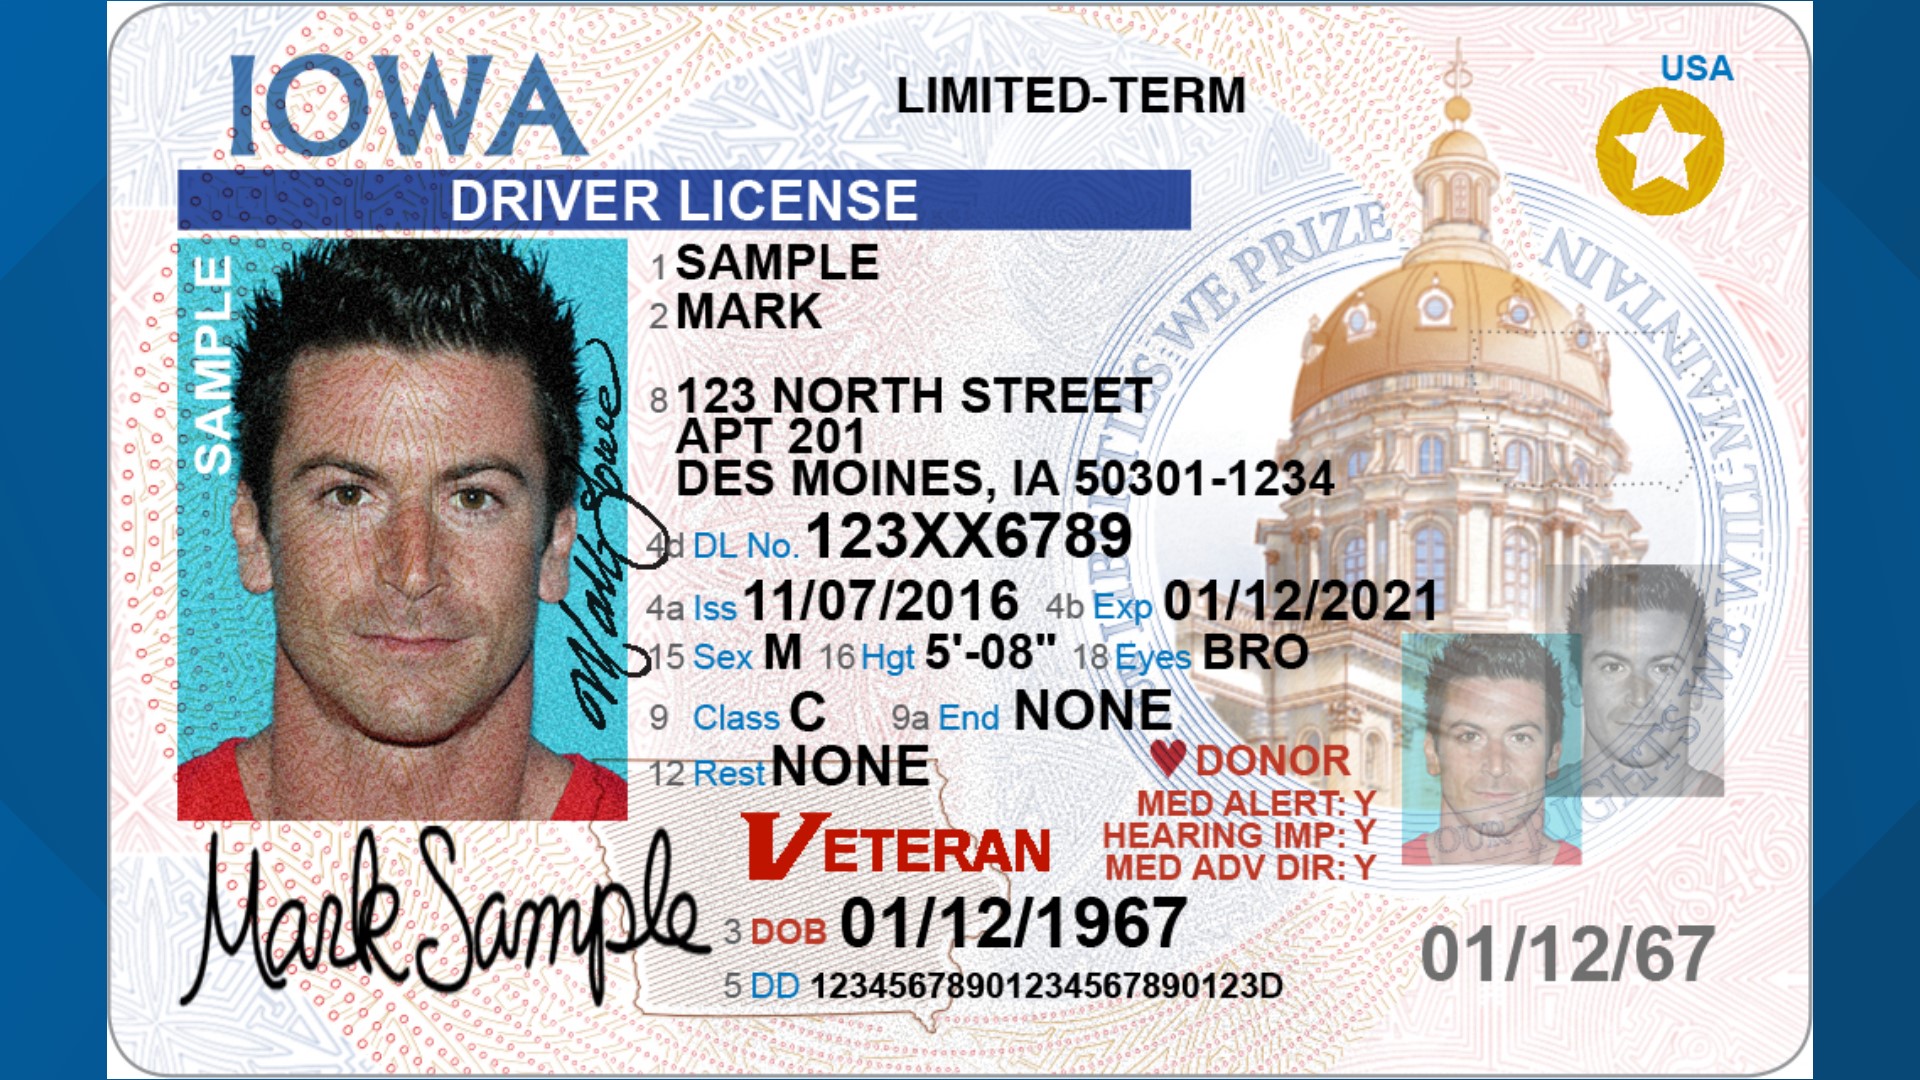 Gov. Kim Reynolds signed a proclamation during the height of the pandemic making valid expired driver's licenses, but that ended in January.